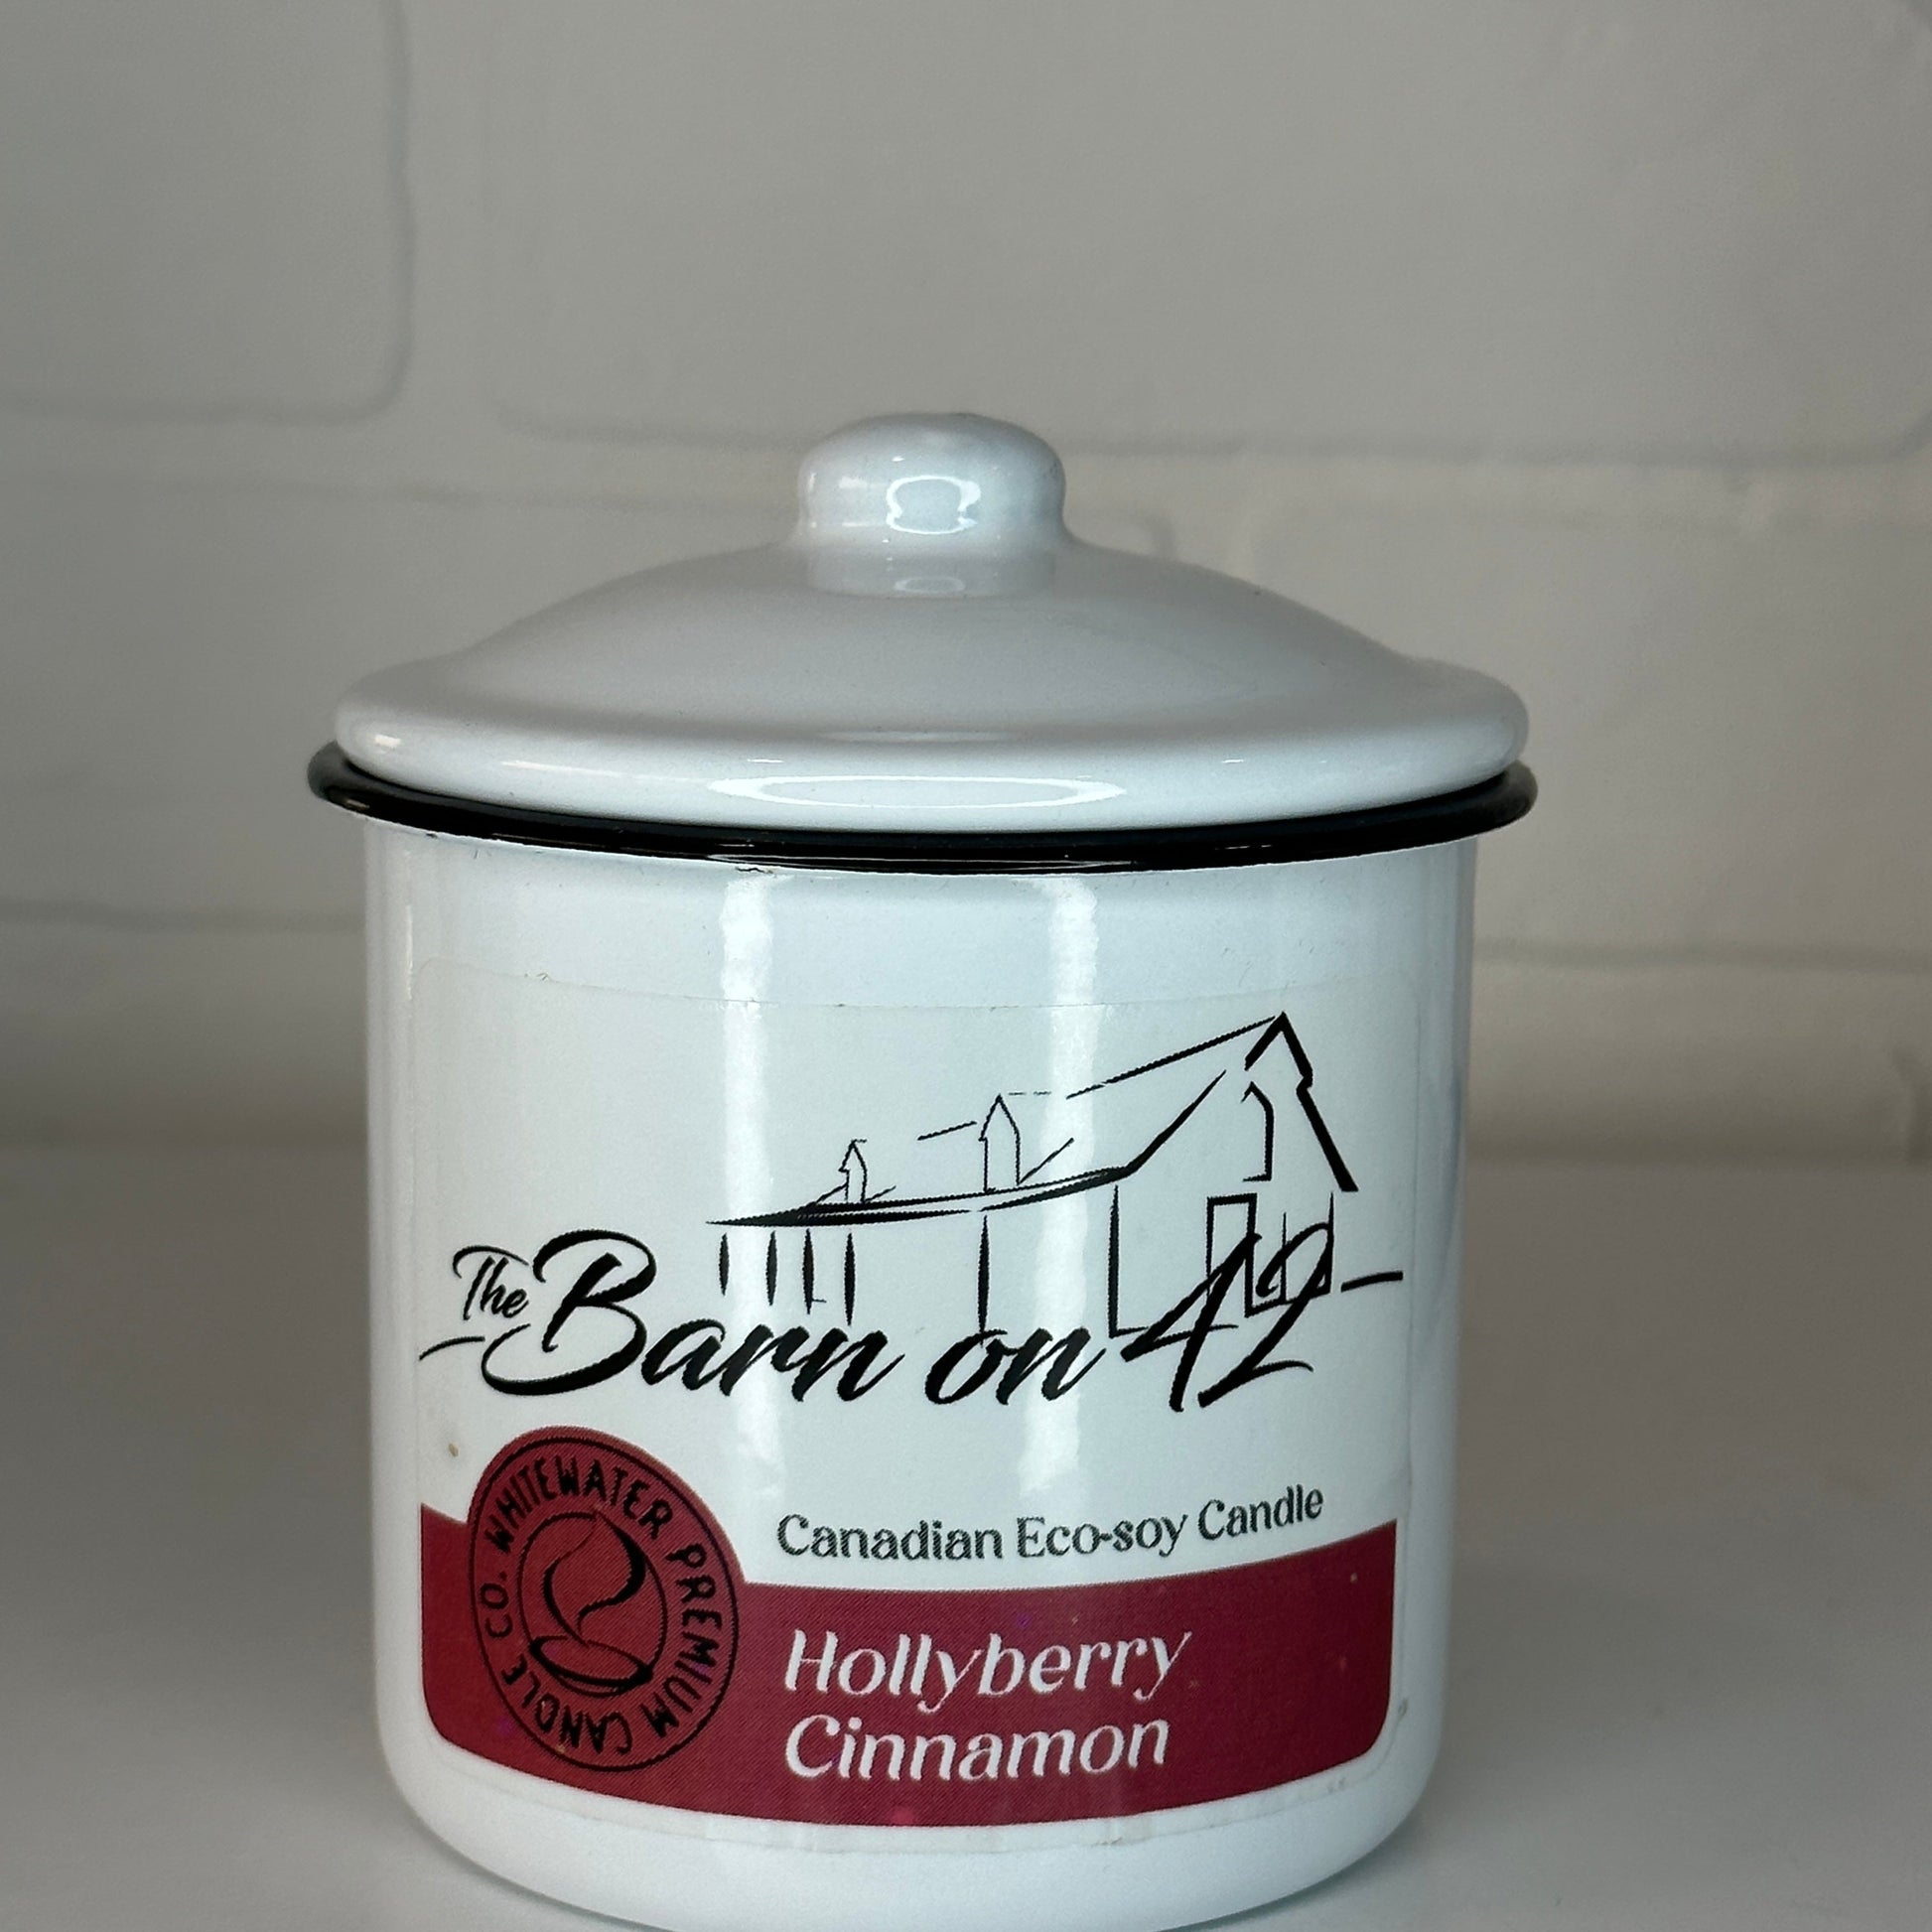 Hollyberry Cinnamon 9 oz Eco-Soy Candle Whitewater Candles